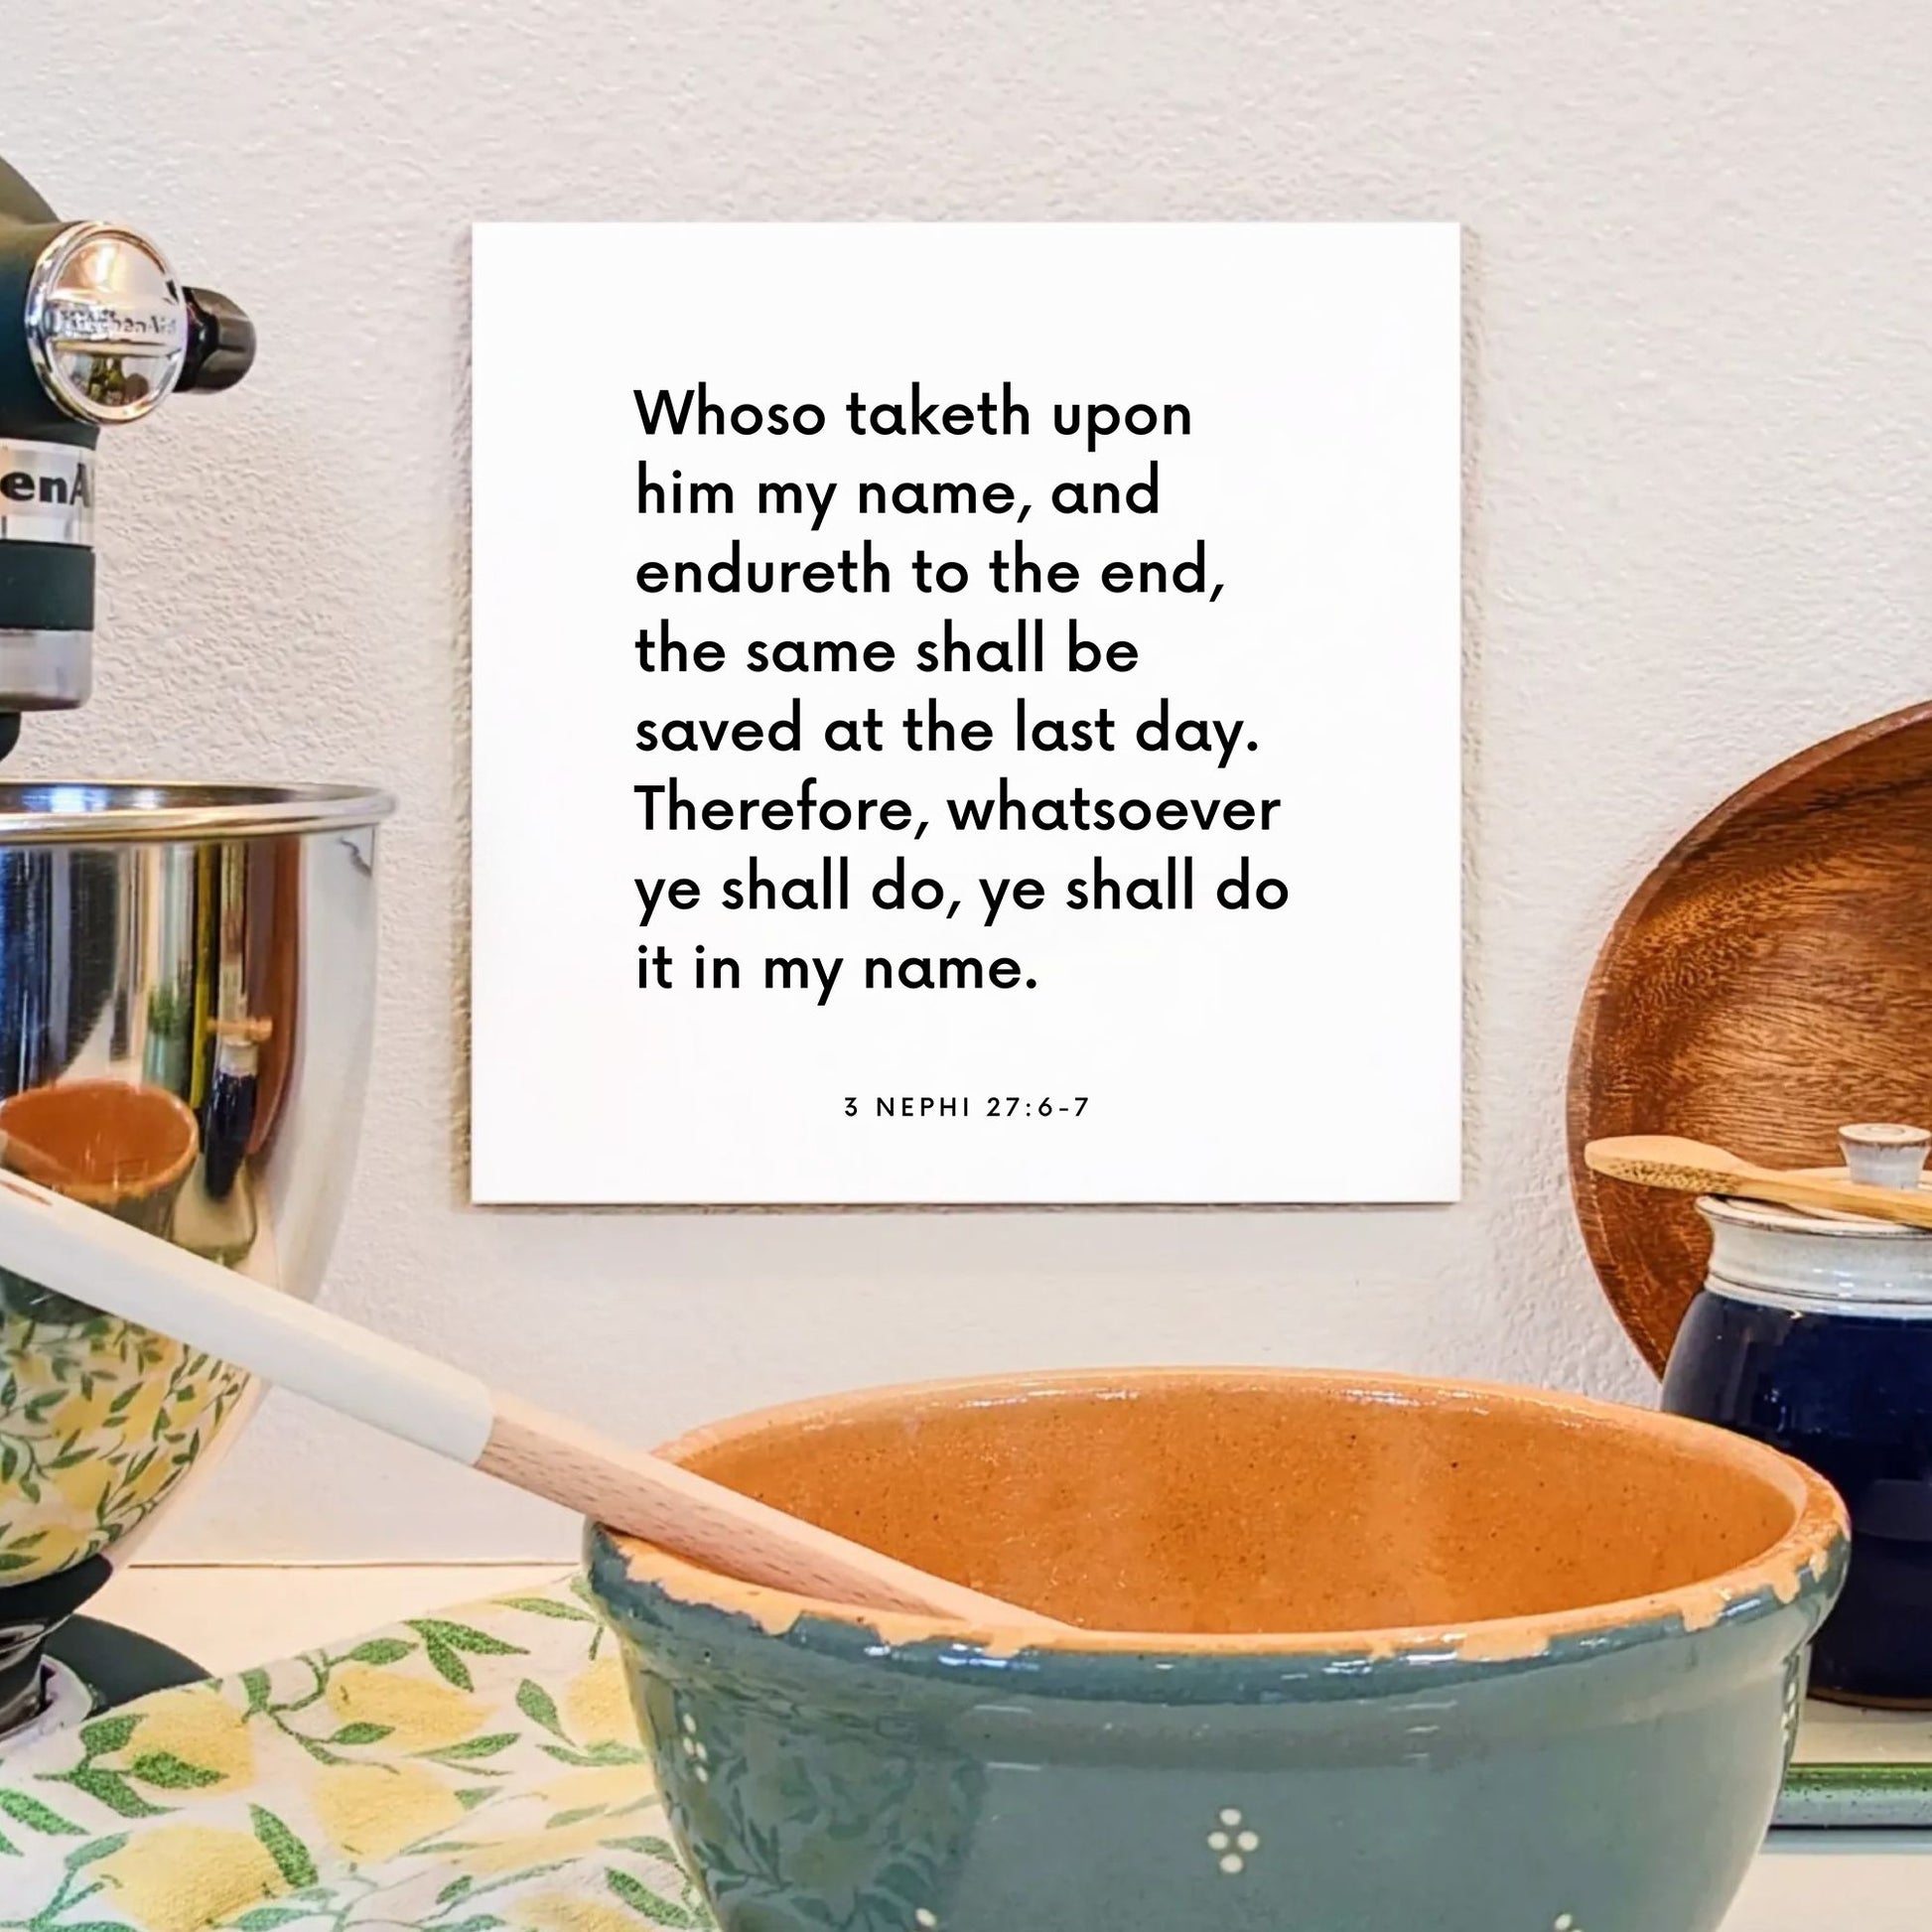 Kitchen mouting of the scripture tile for 3 Nephi 27:6-7 - "Whatsoever ye shall do, ye shall do it in my name"